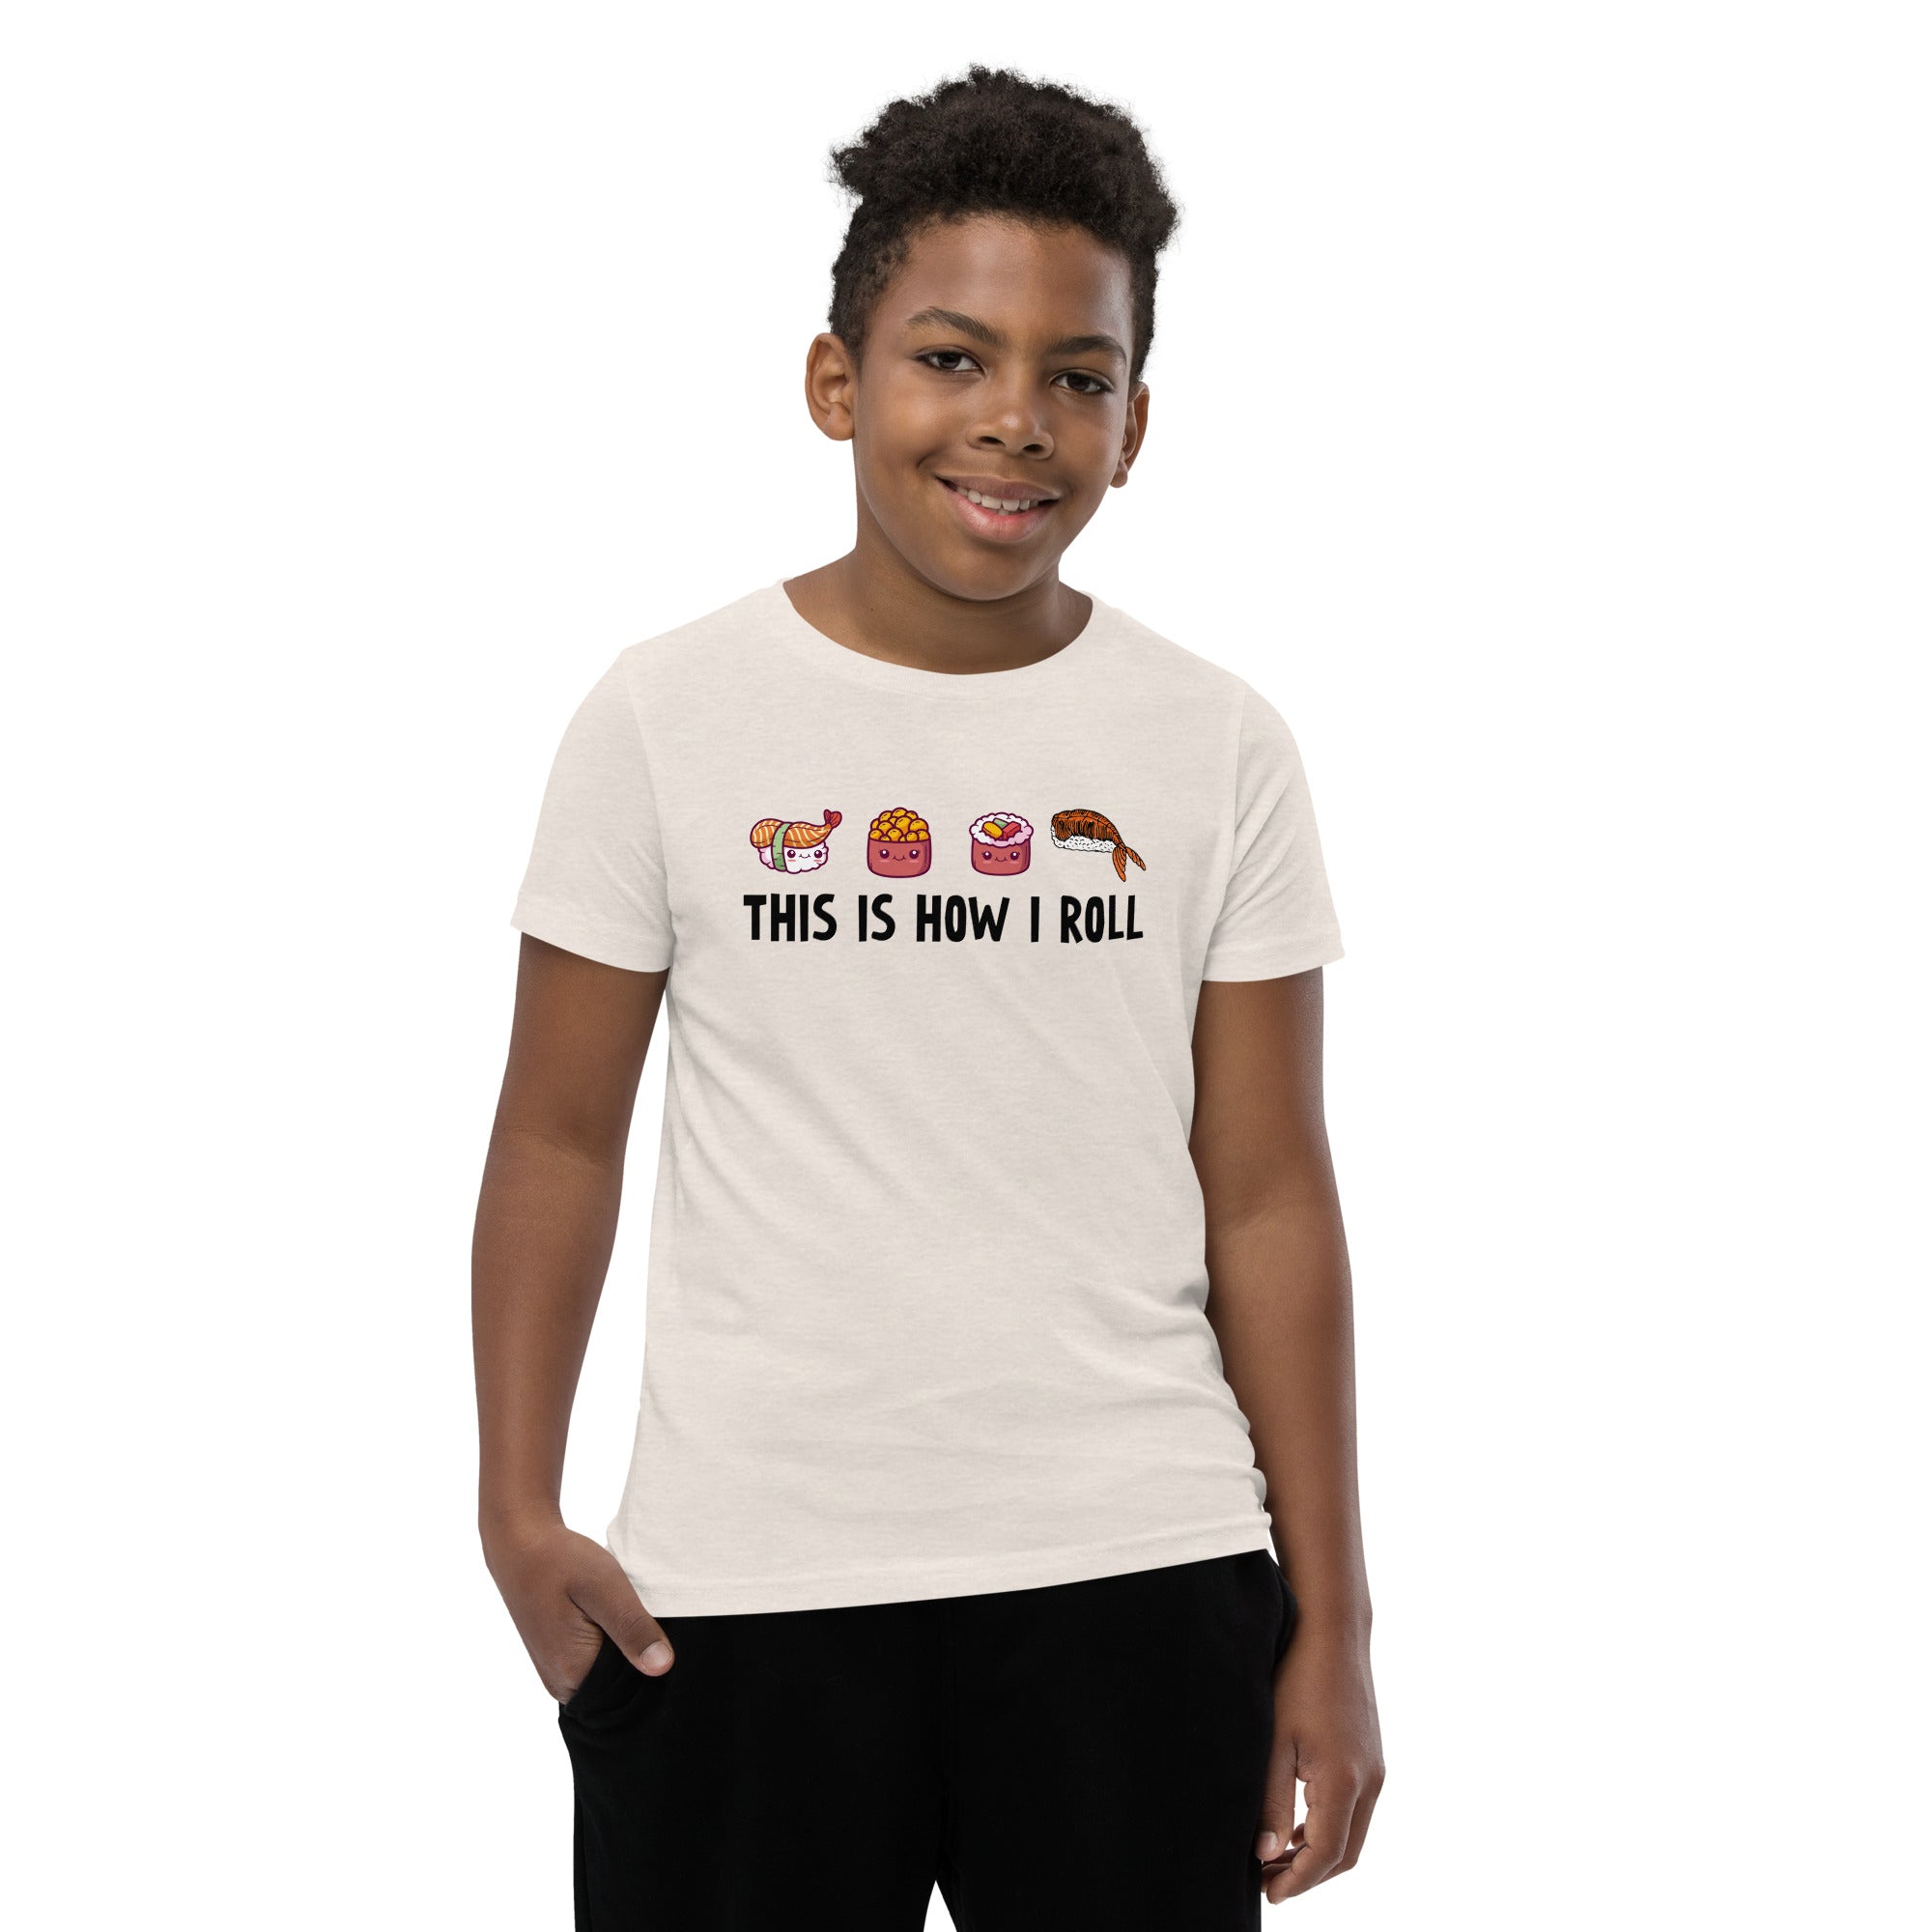 How I Roll - Youth Short Sleeve T-Shirt